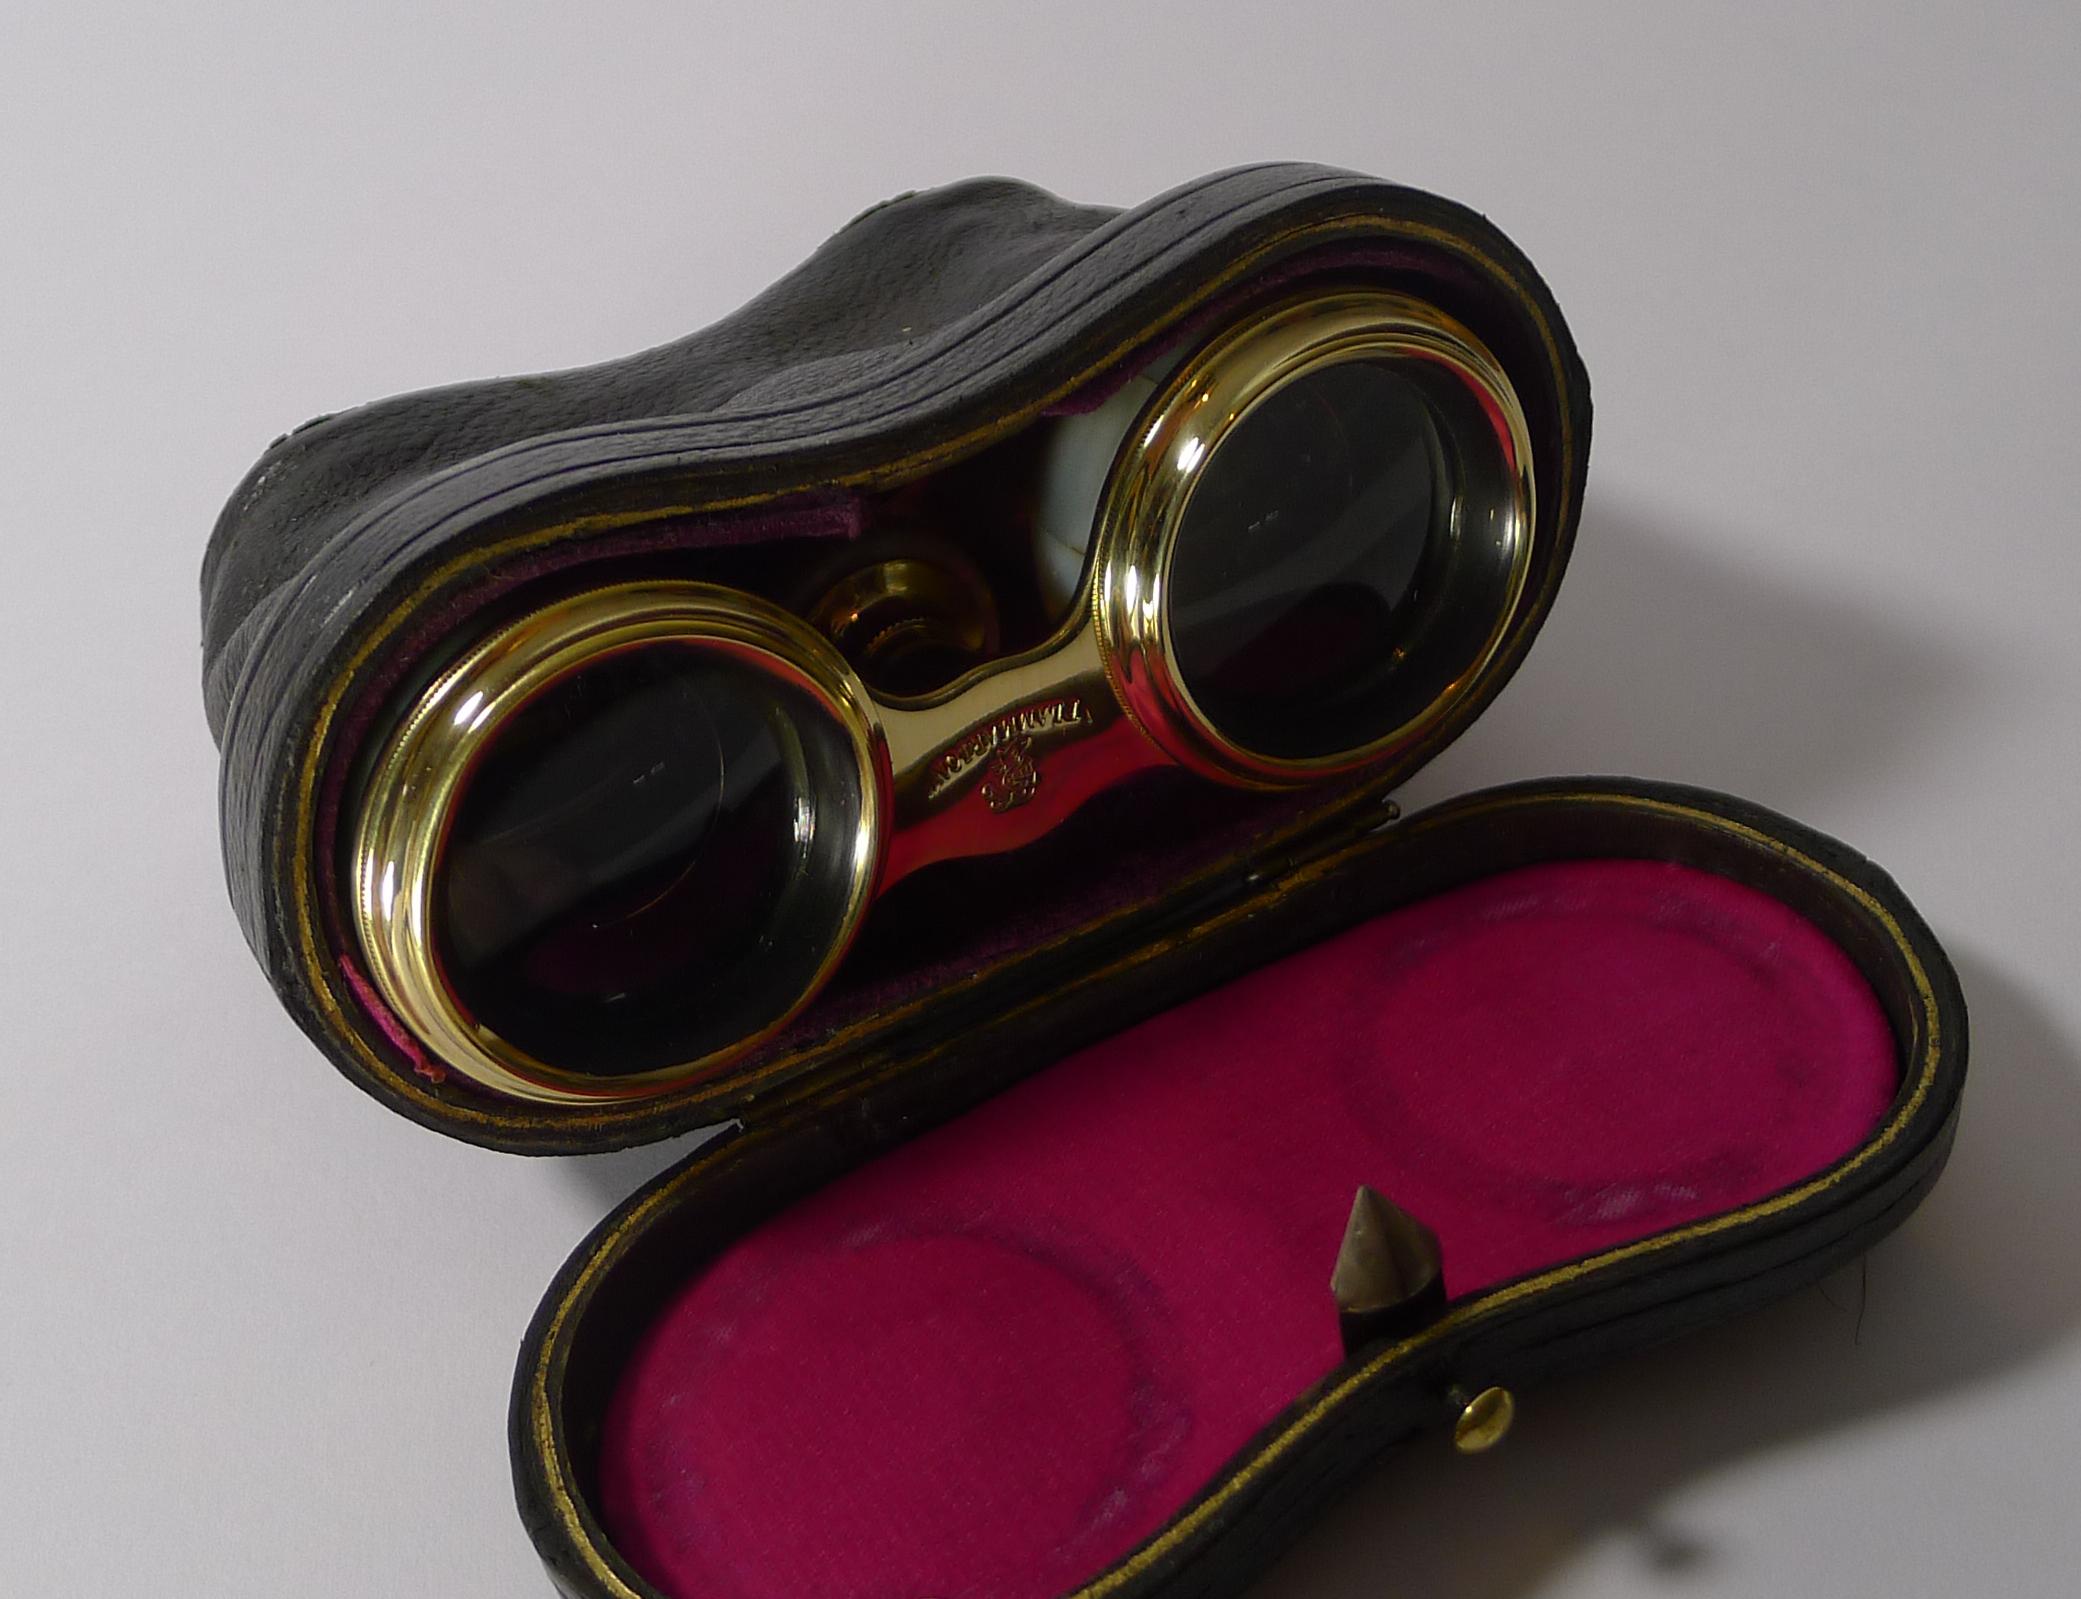 A handsome pair of antique Opera glasses professionally cleaned and polished, restoring them to their former glory dating to circa 1900.

They come with their original leather case lined in silk. The glasses are clad in mother of pearl or Nacre